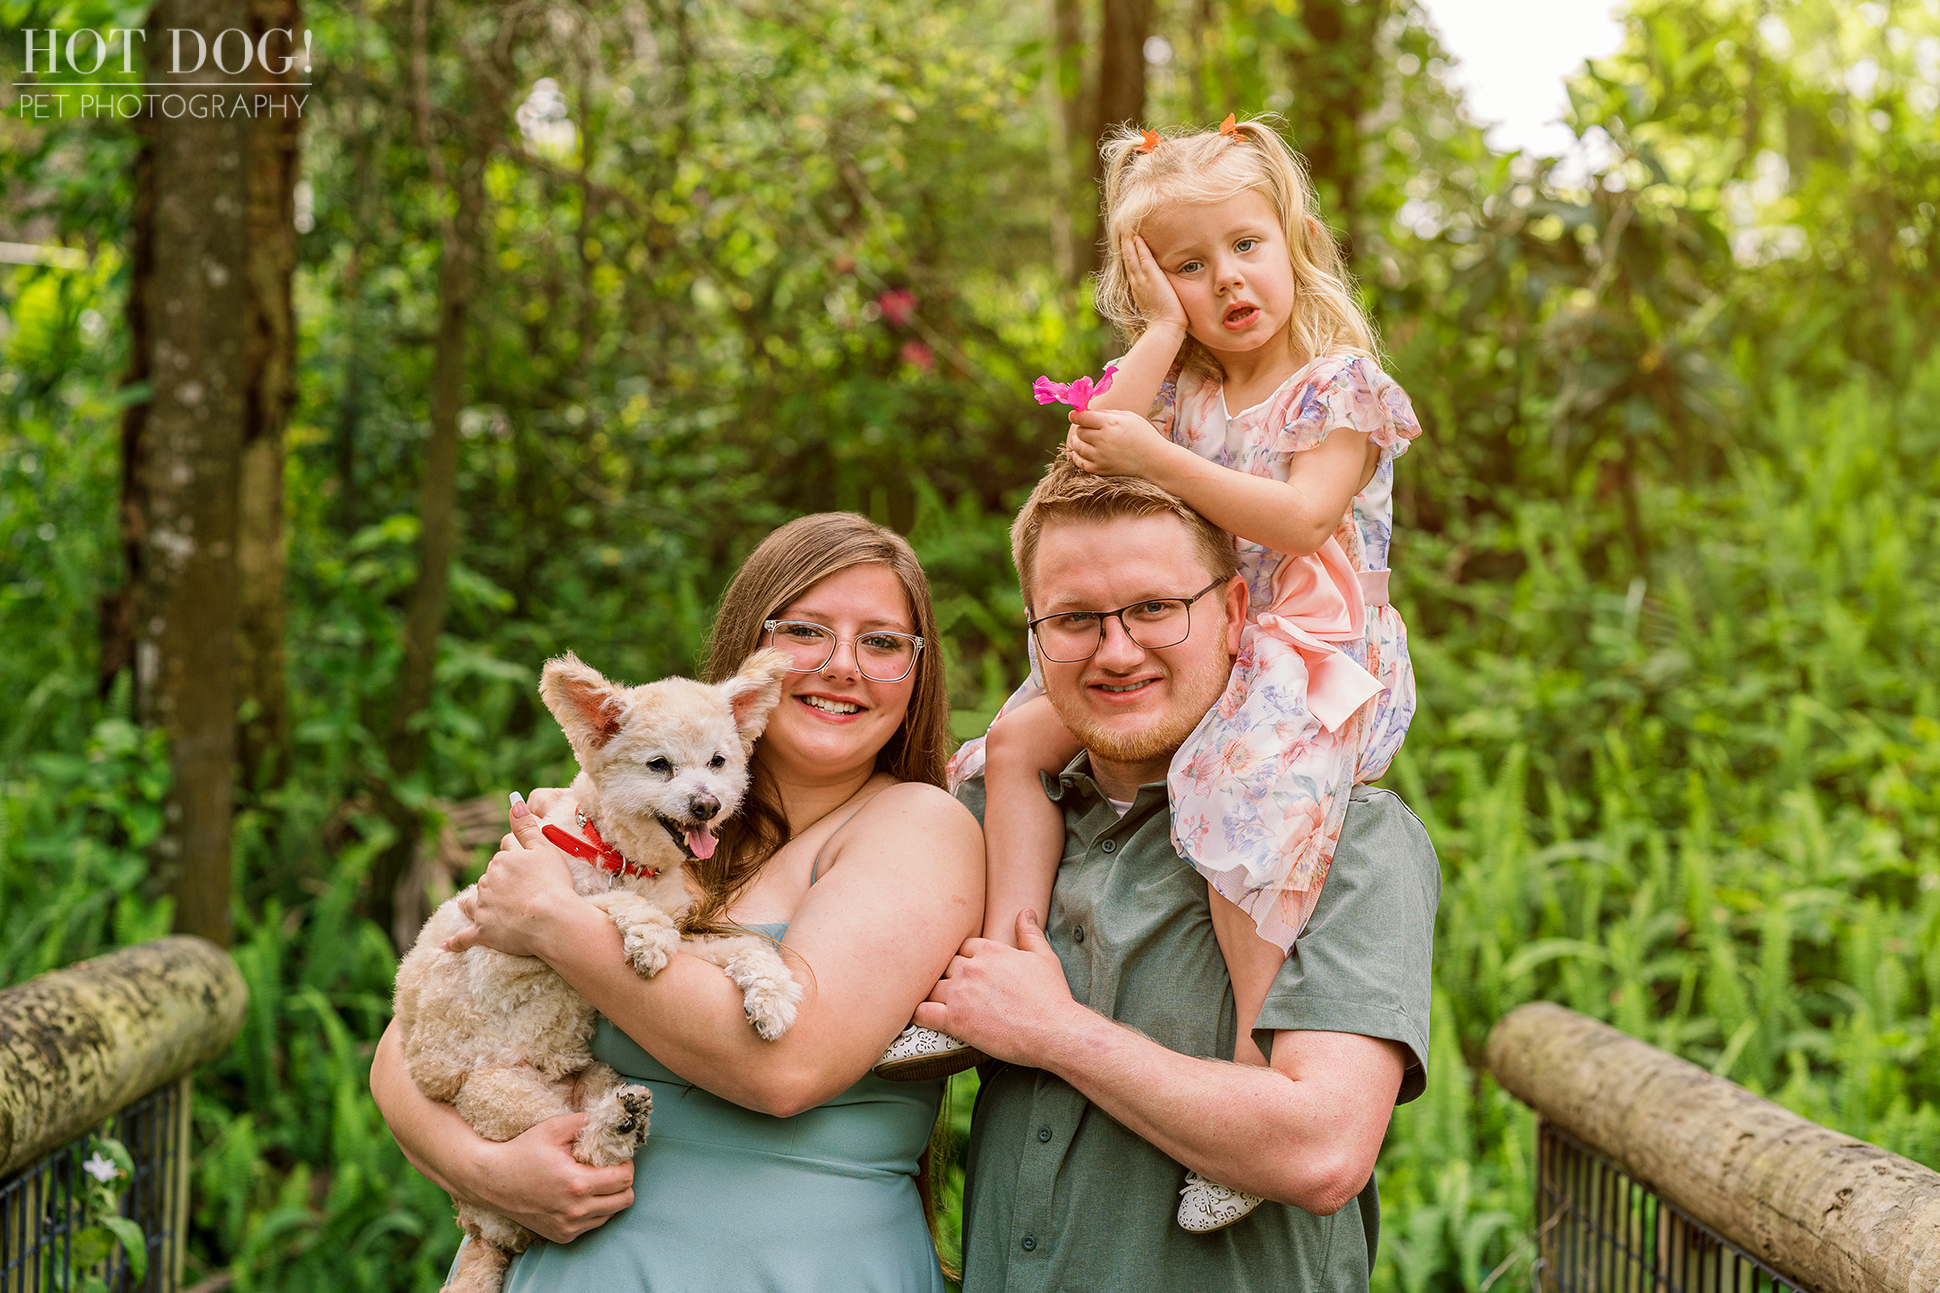 Dickson Azalea Park provides a beautiful backdrop for this family photo of Cindel, Connor, Ella, and Miley.